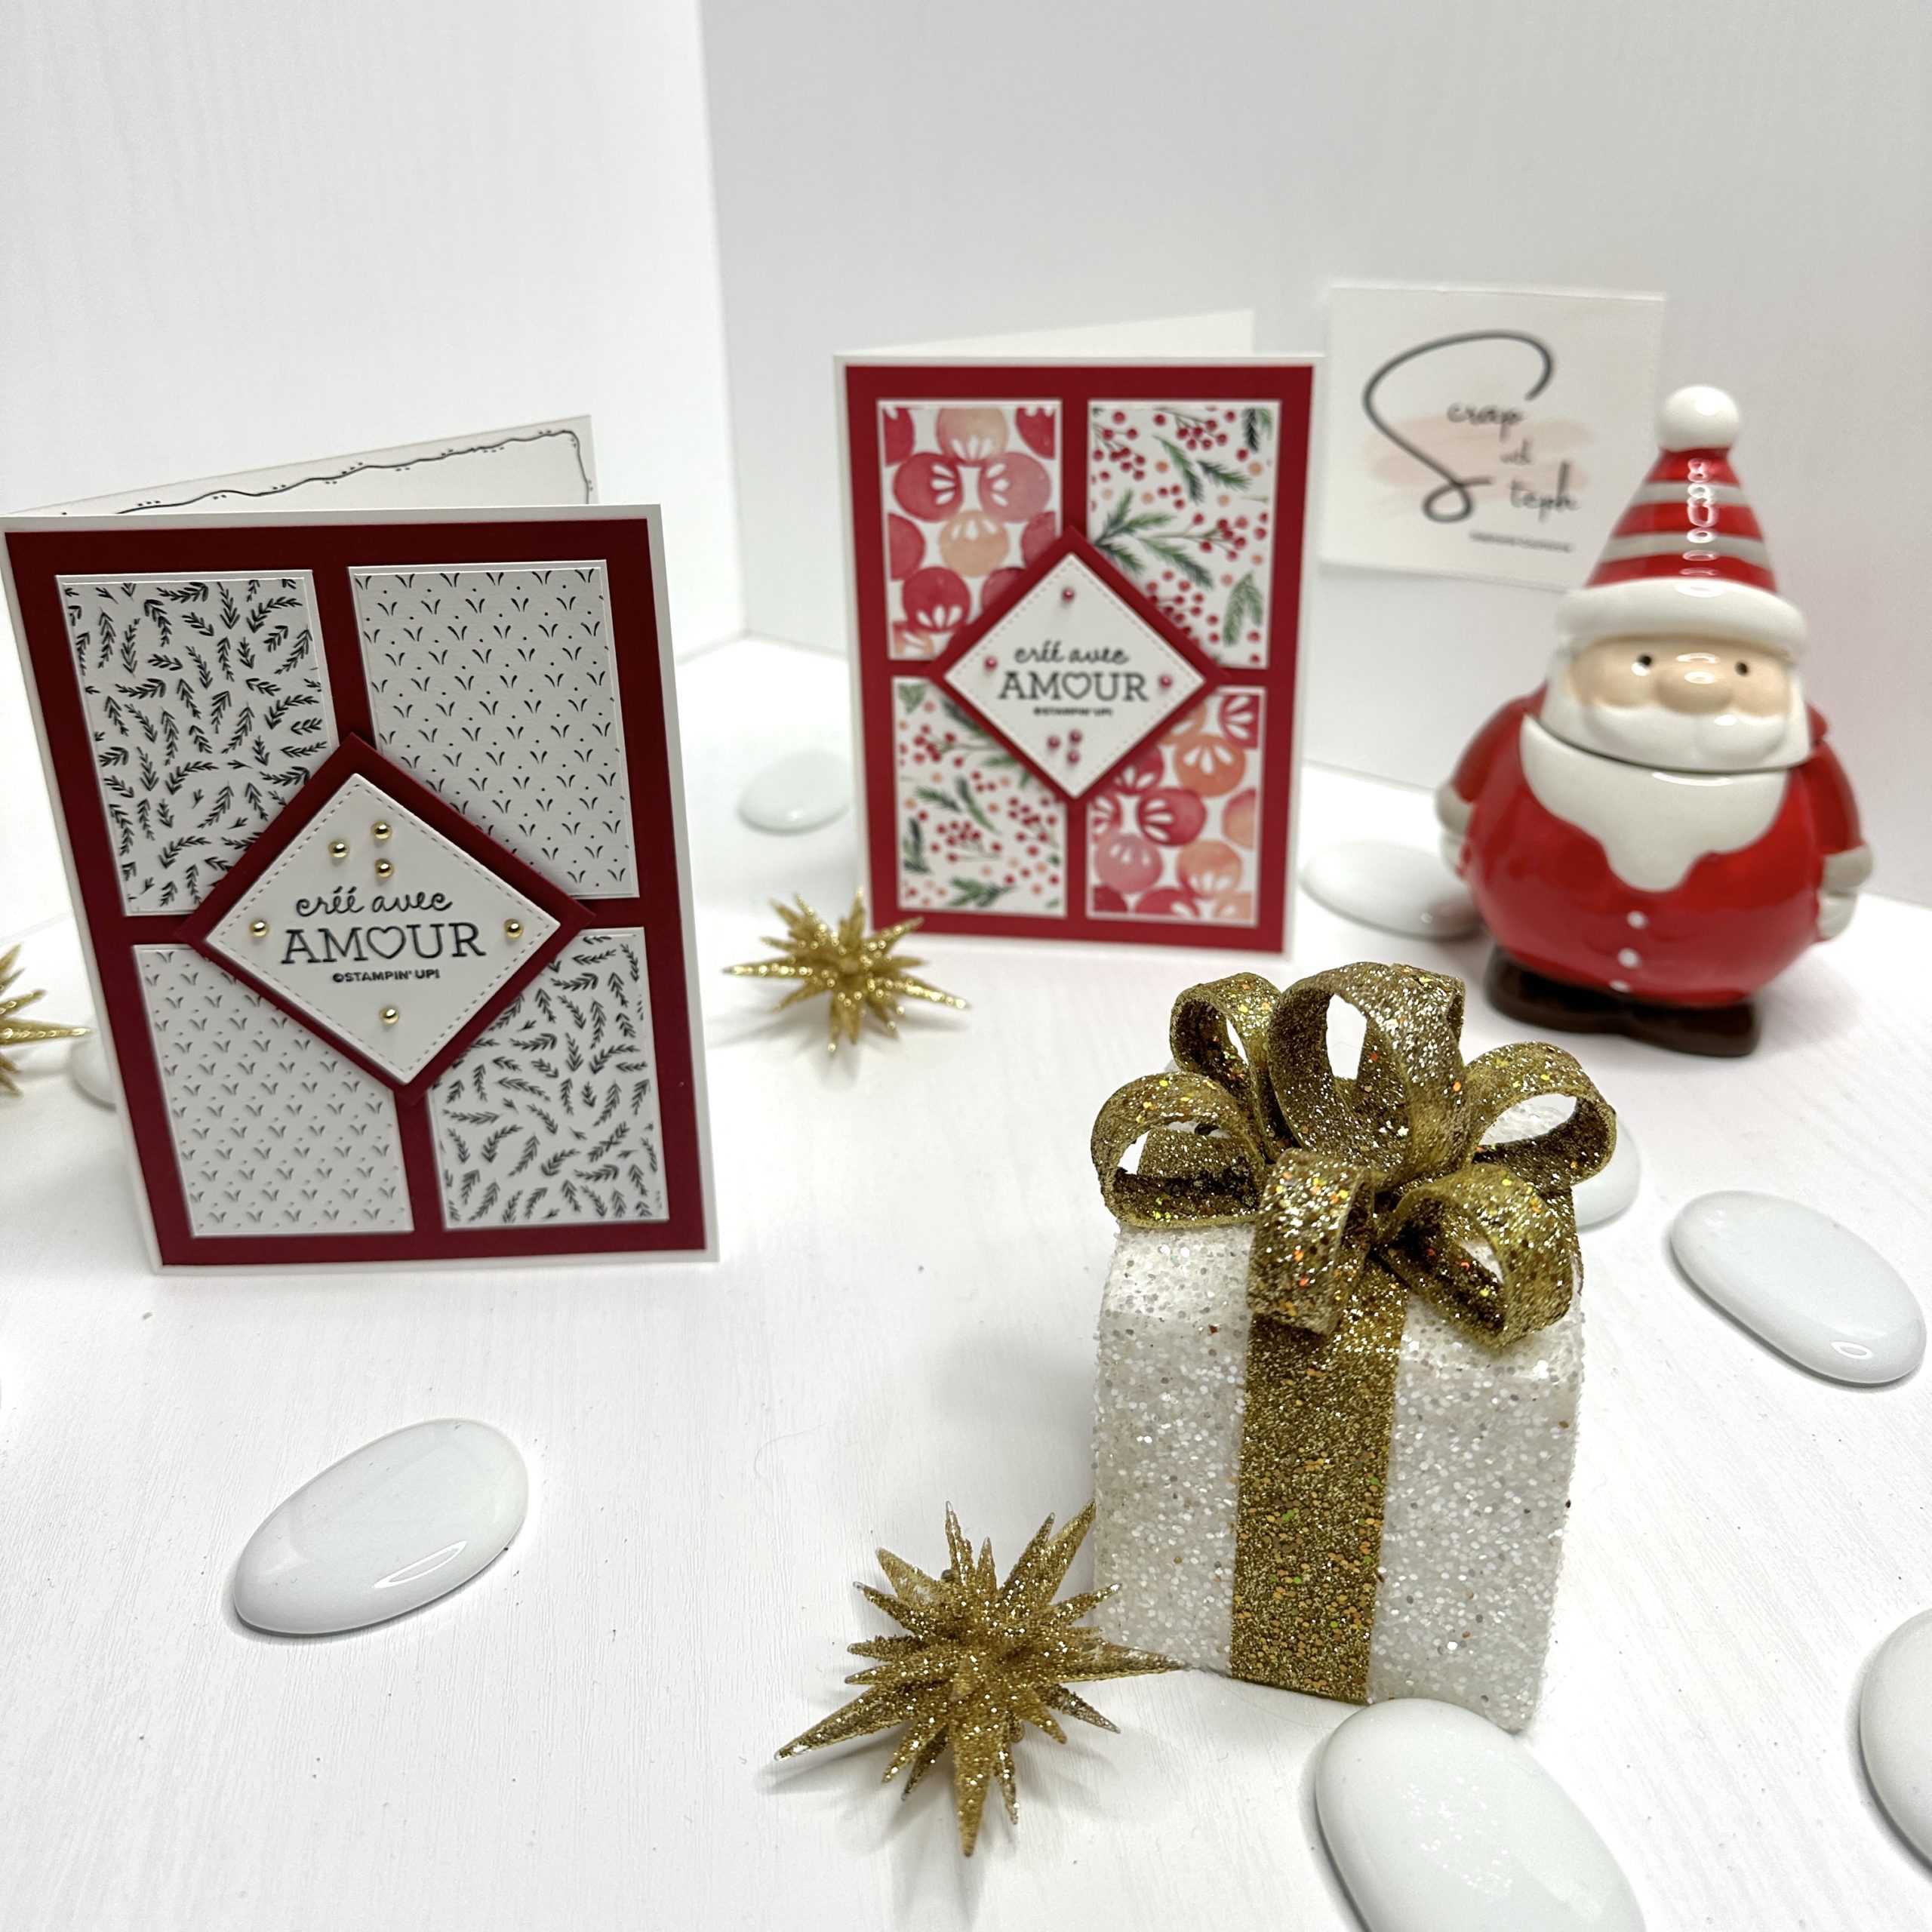 Chansons Noël cycle 1 (Le jardin d'Alysse)  Stamping up cards, Christmas  sweaters, Noel